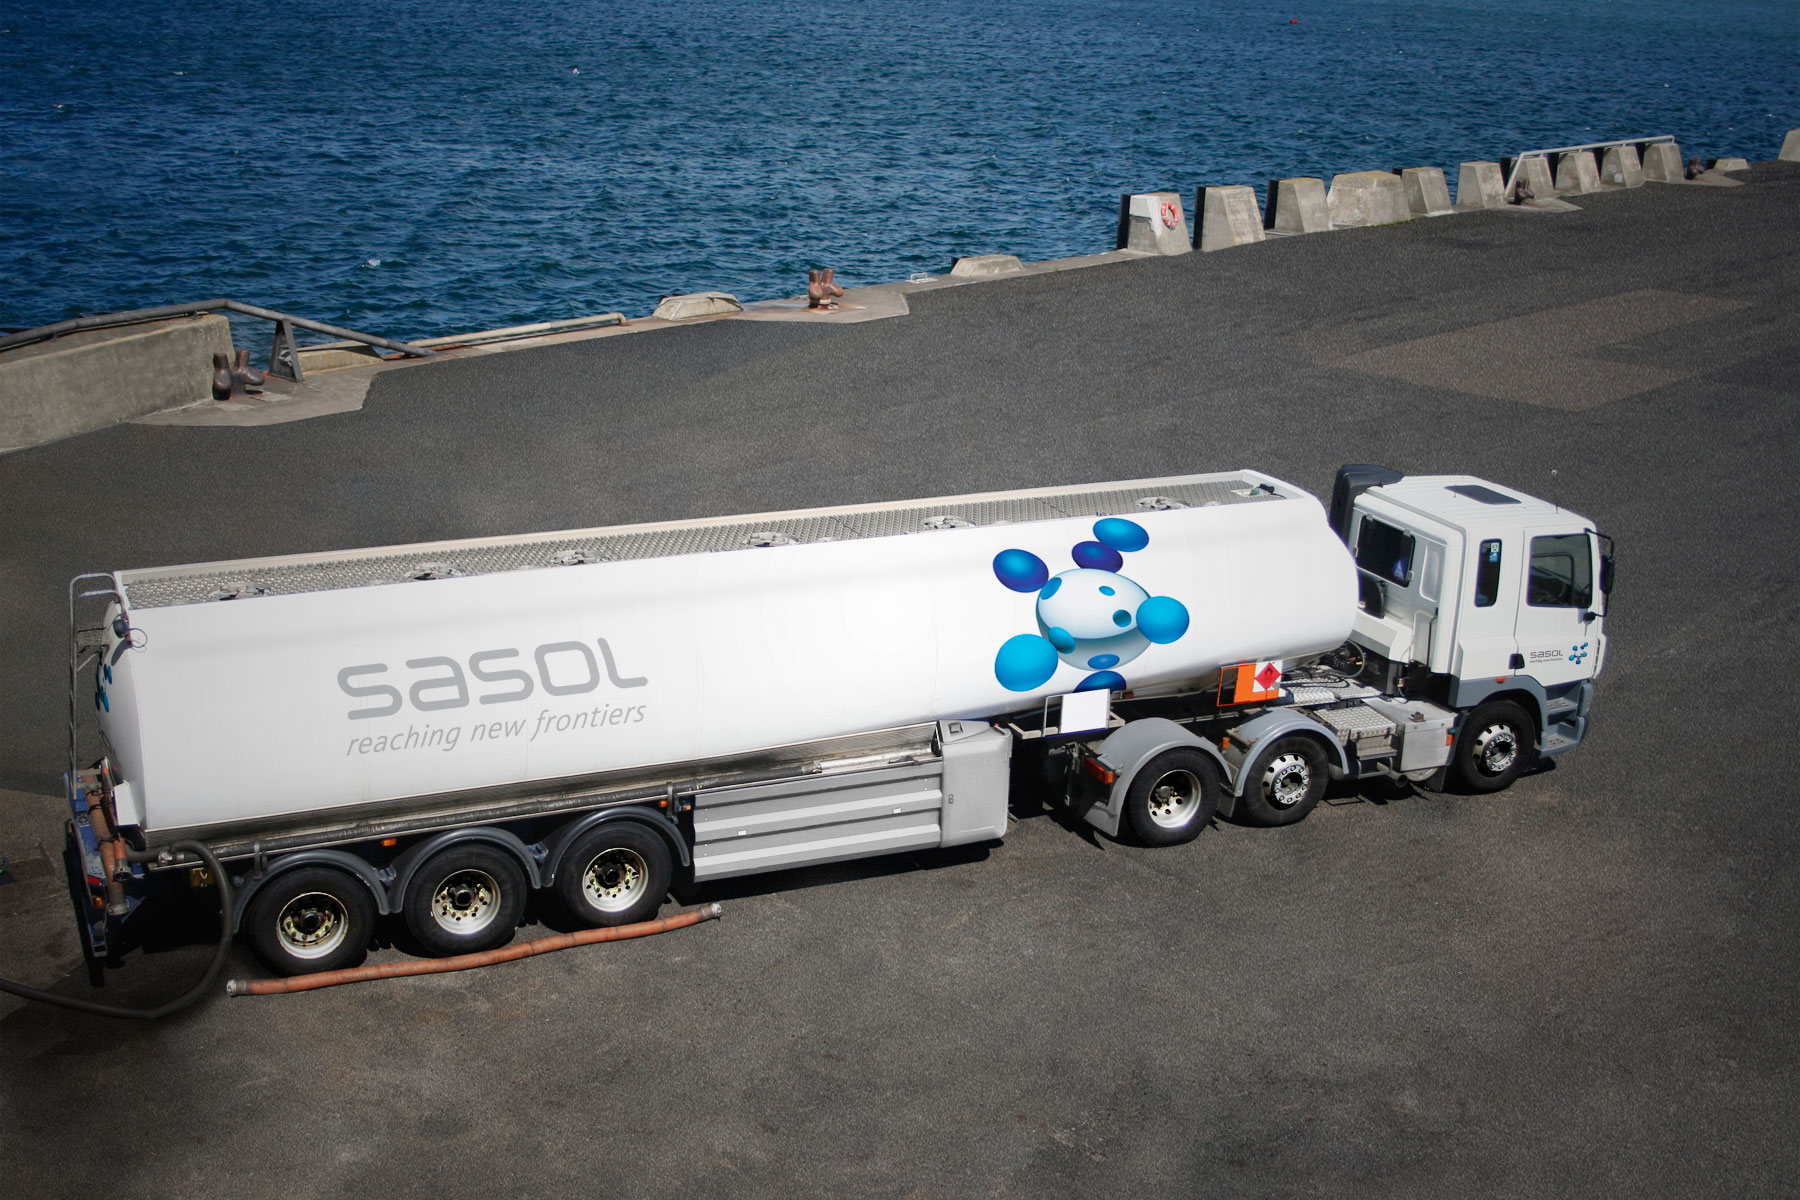 Sasol has a large fleet of all types of vehicles. Guidelines were produced for all shapes and sizes.